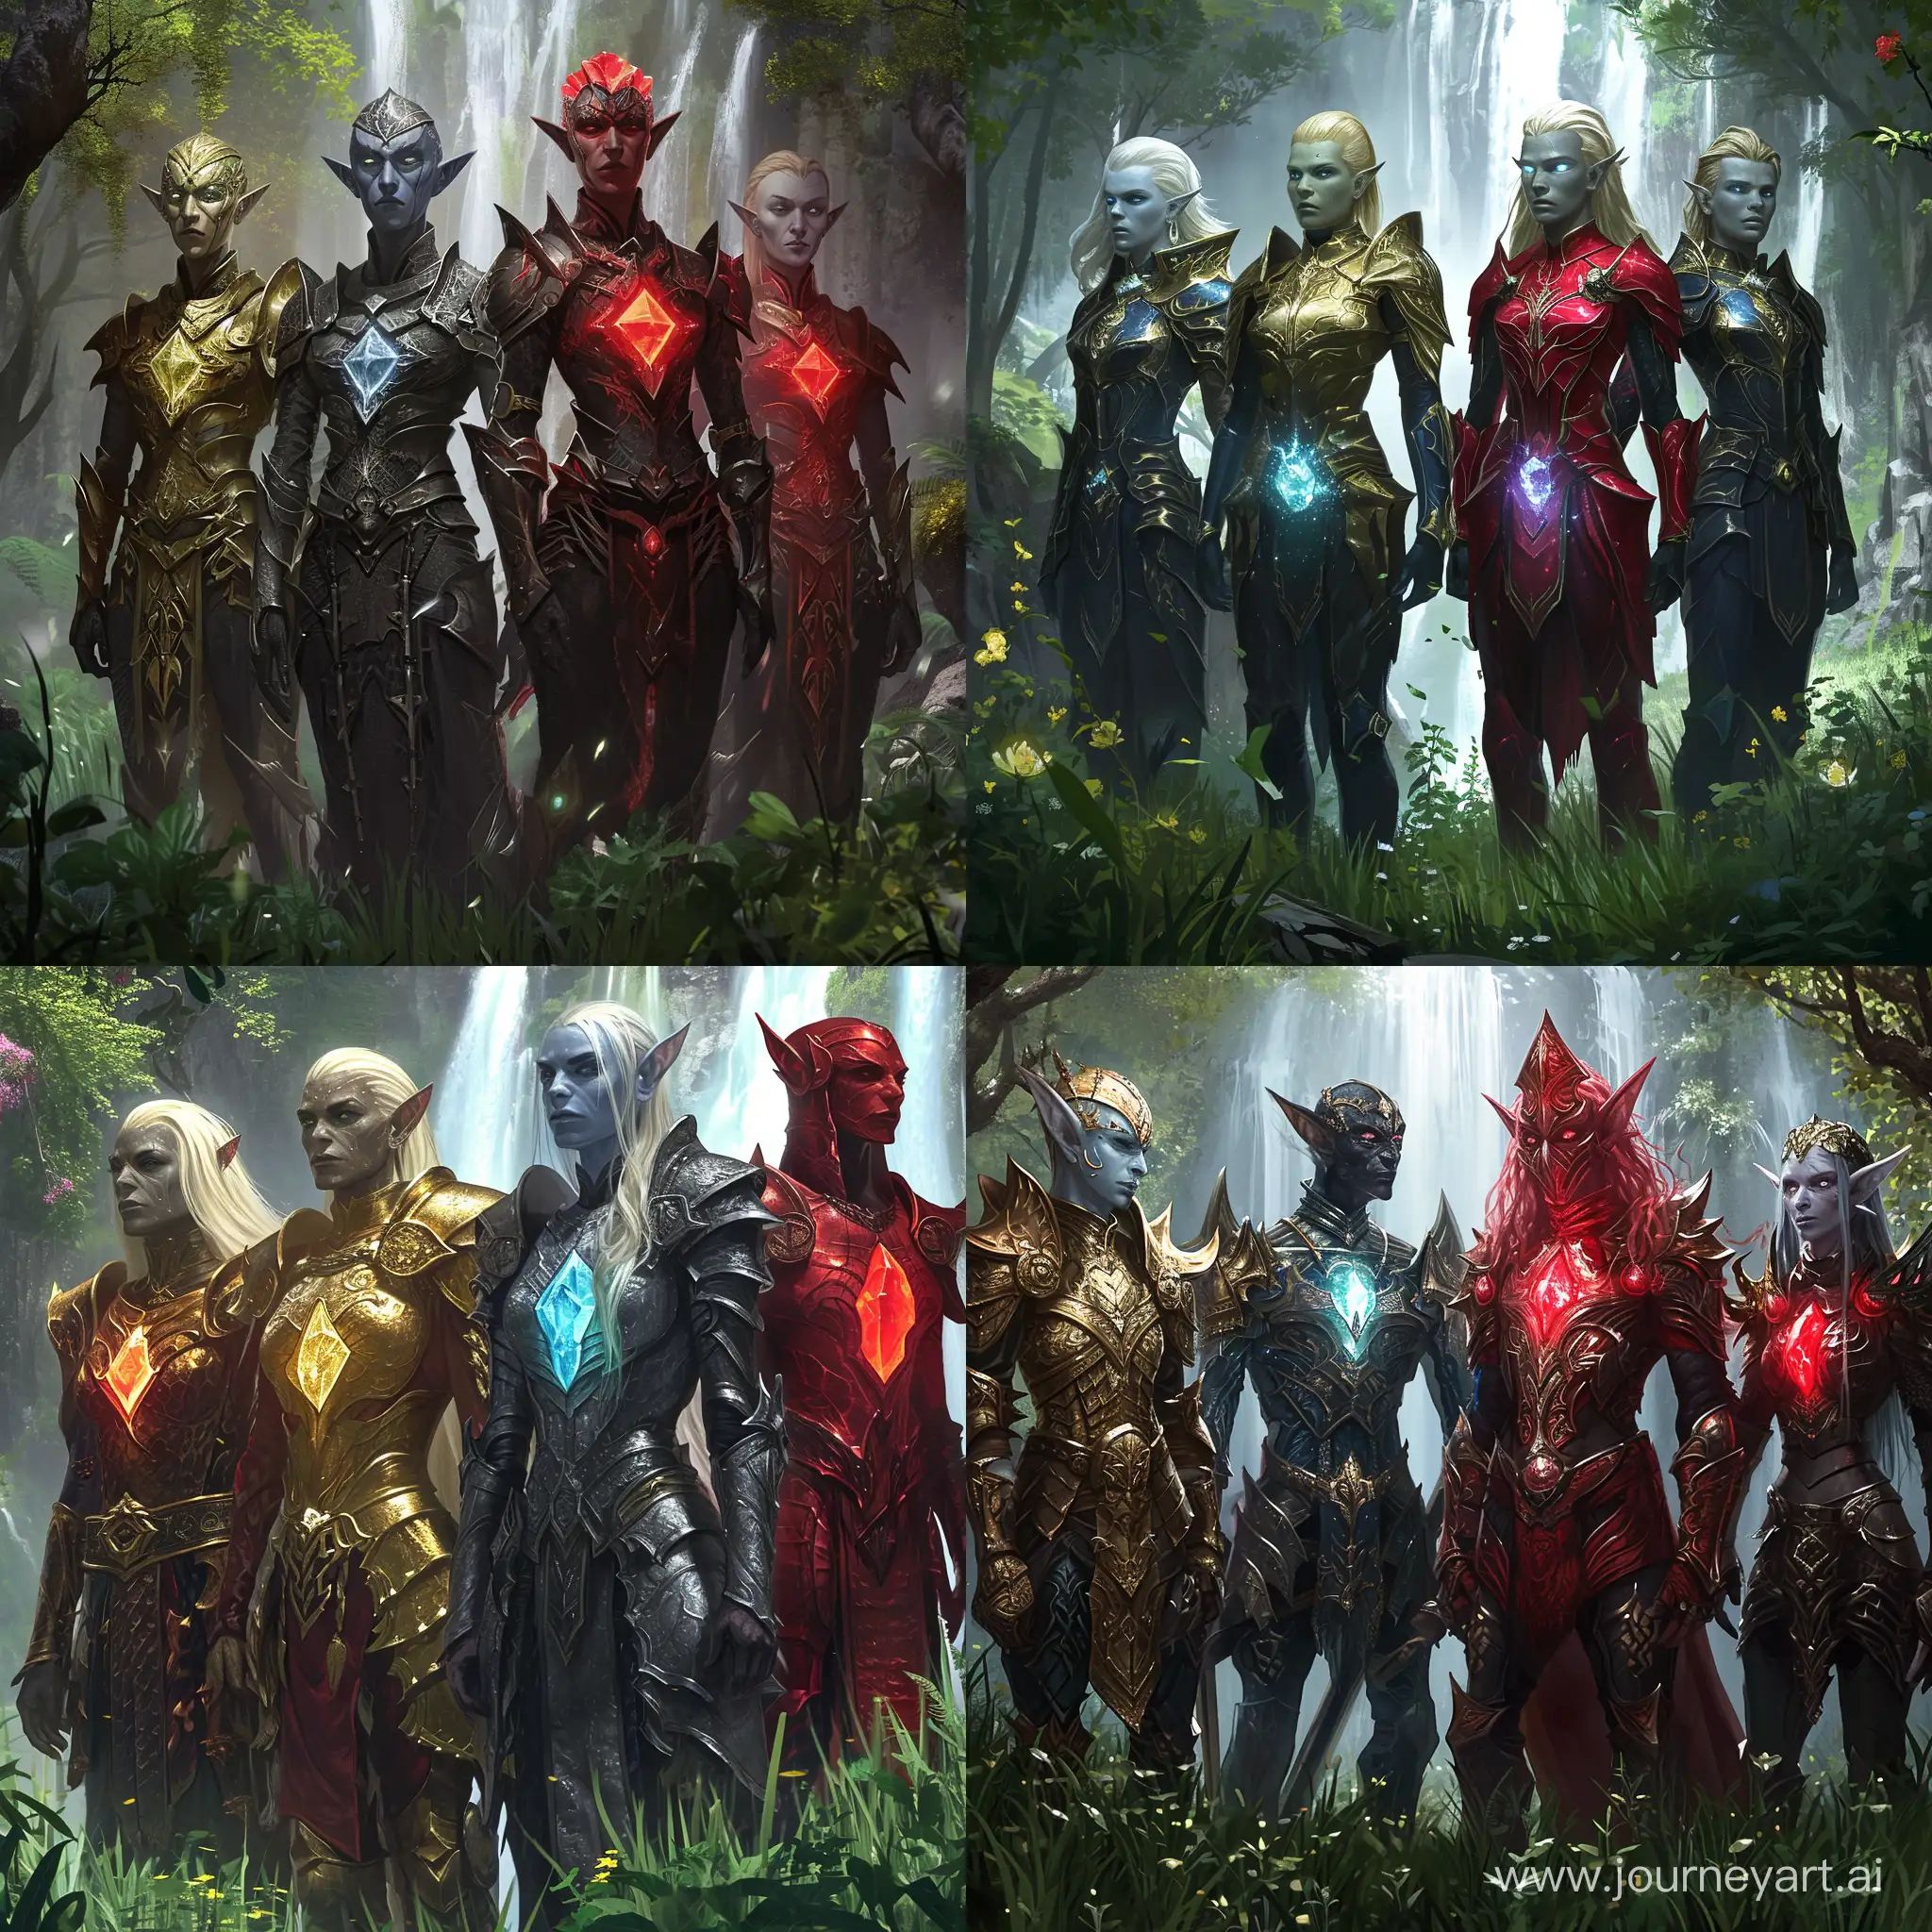 Generate image a  four families of elves:
- elves of the west gilded armor
- midnight elves
- Elves of the East red armor
- dark half-elves with pale faces that look like ghosts, heavy armor,
magic crystal on chests in light glow, forest, waterfalls,
grass, fantasy, epic, 4k, hd
